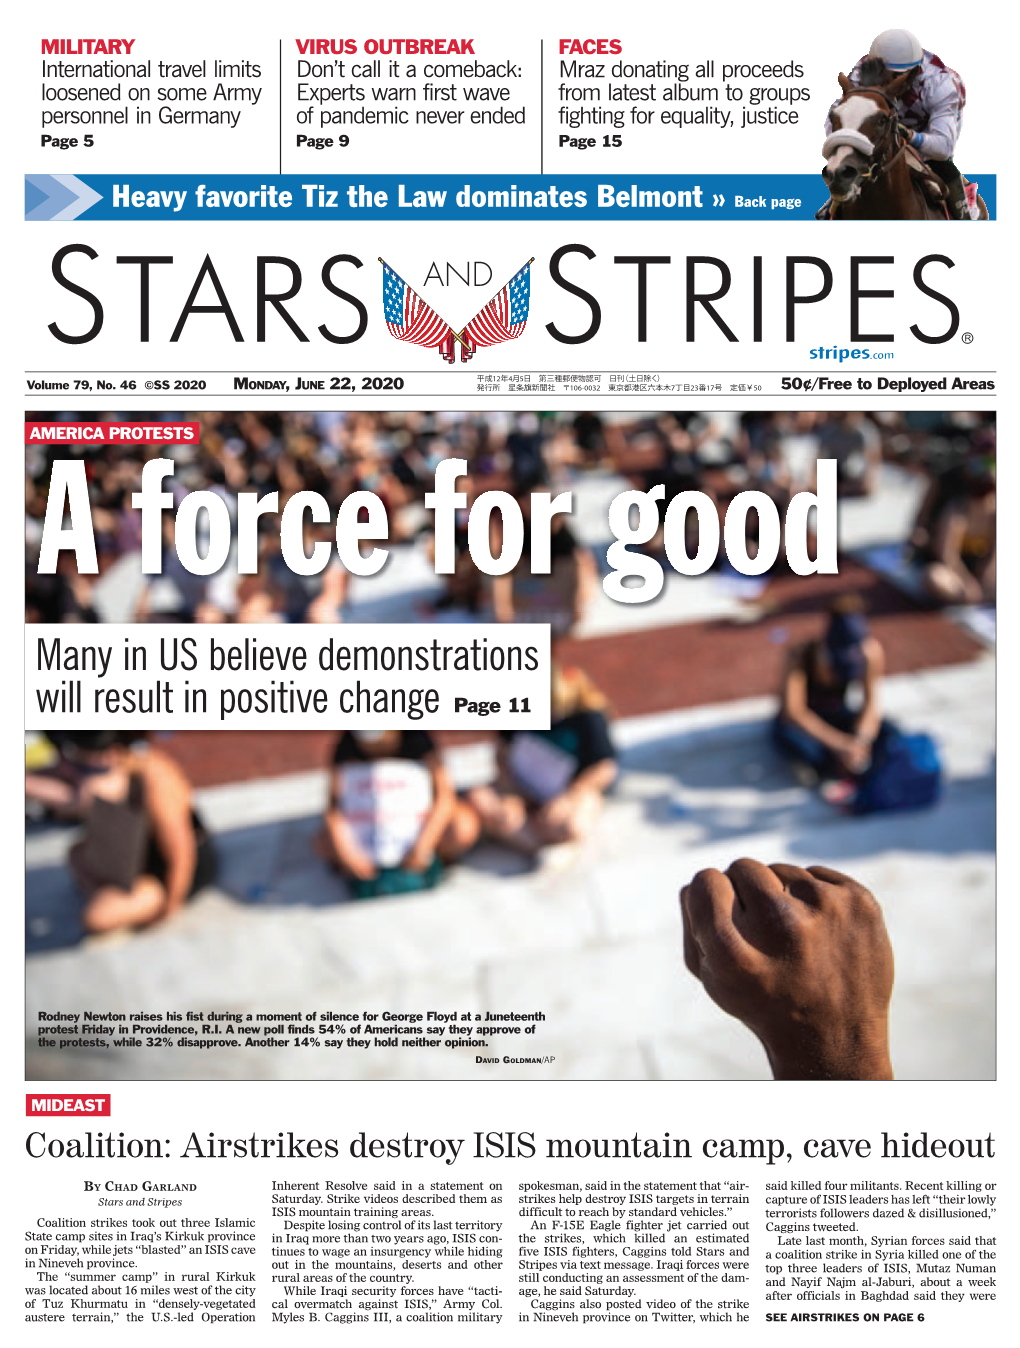 A Force for Good Many in US Believe Demonstrations Will Result in Positive Change Page 11